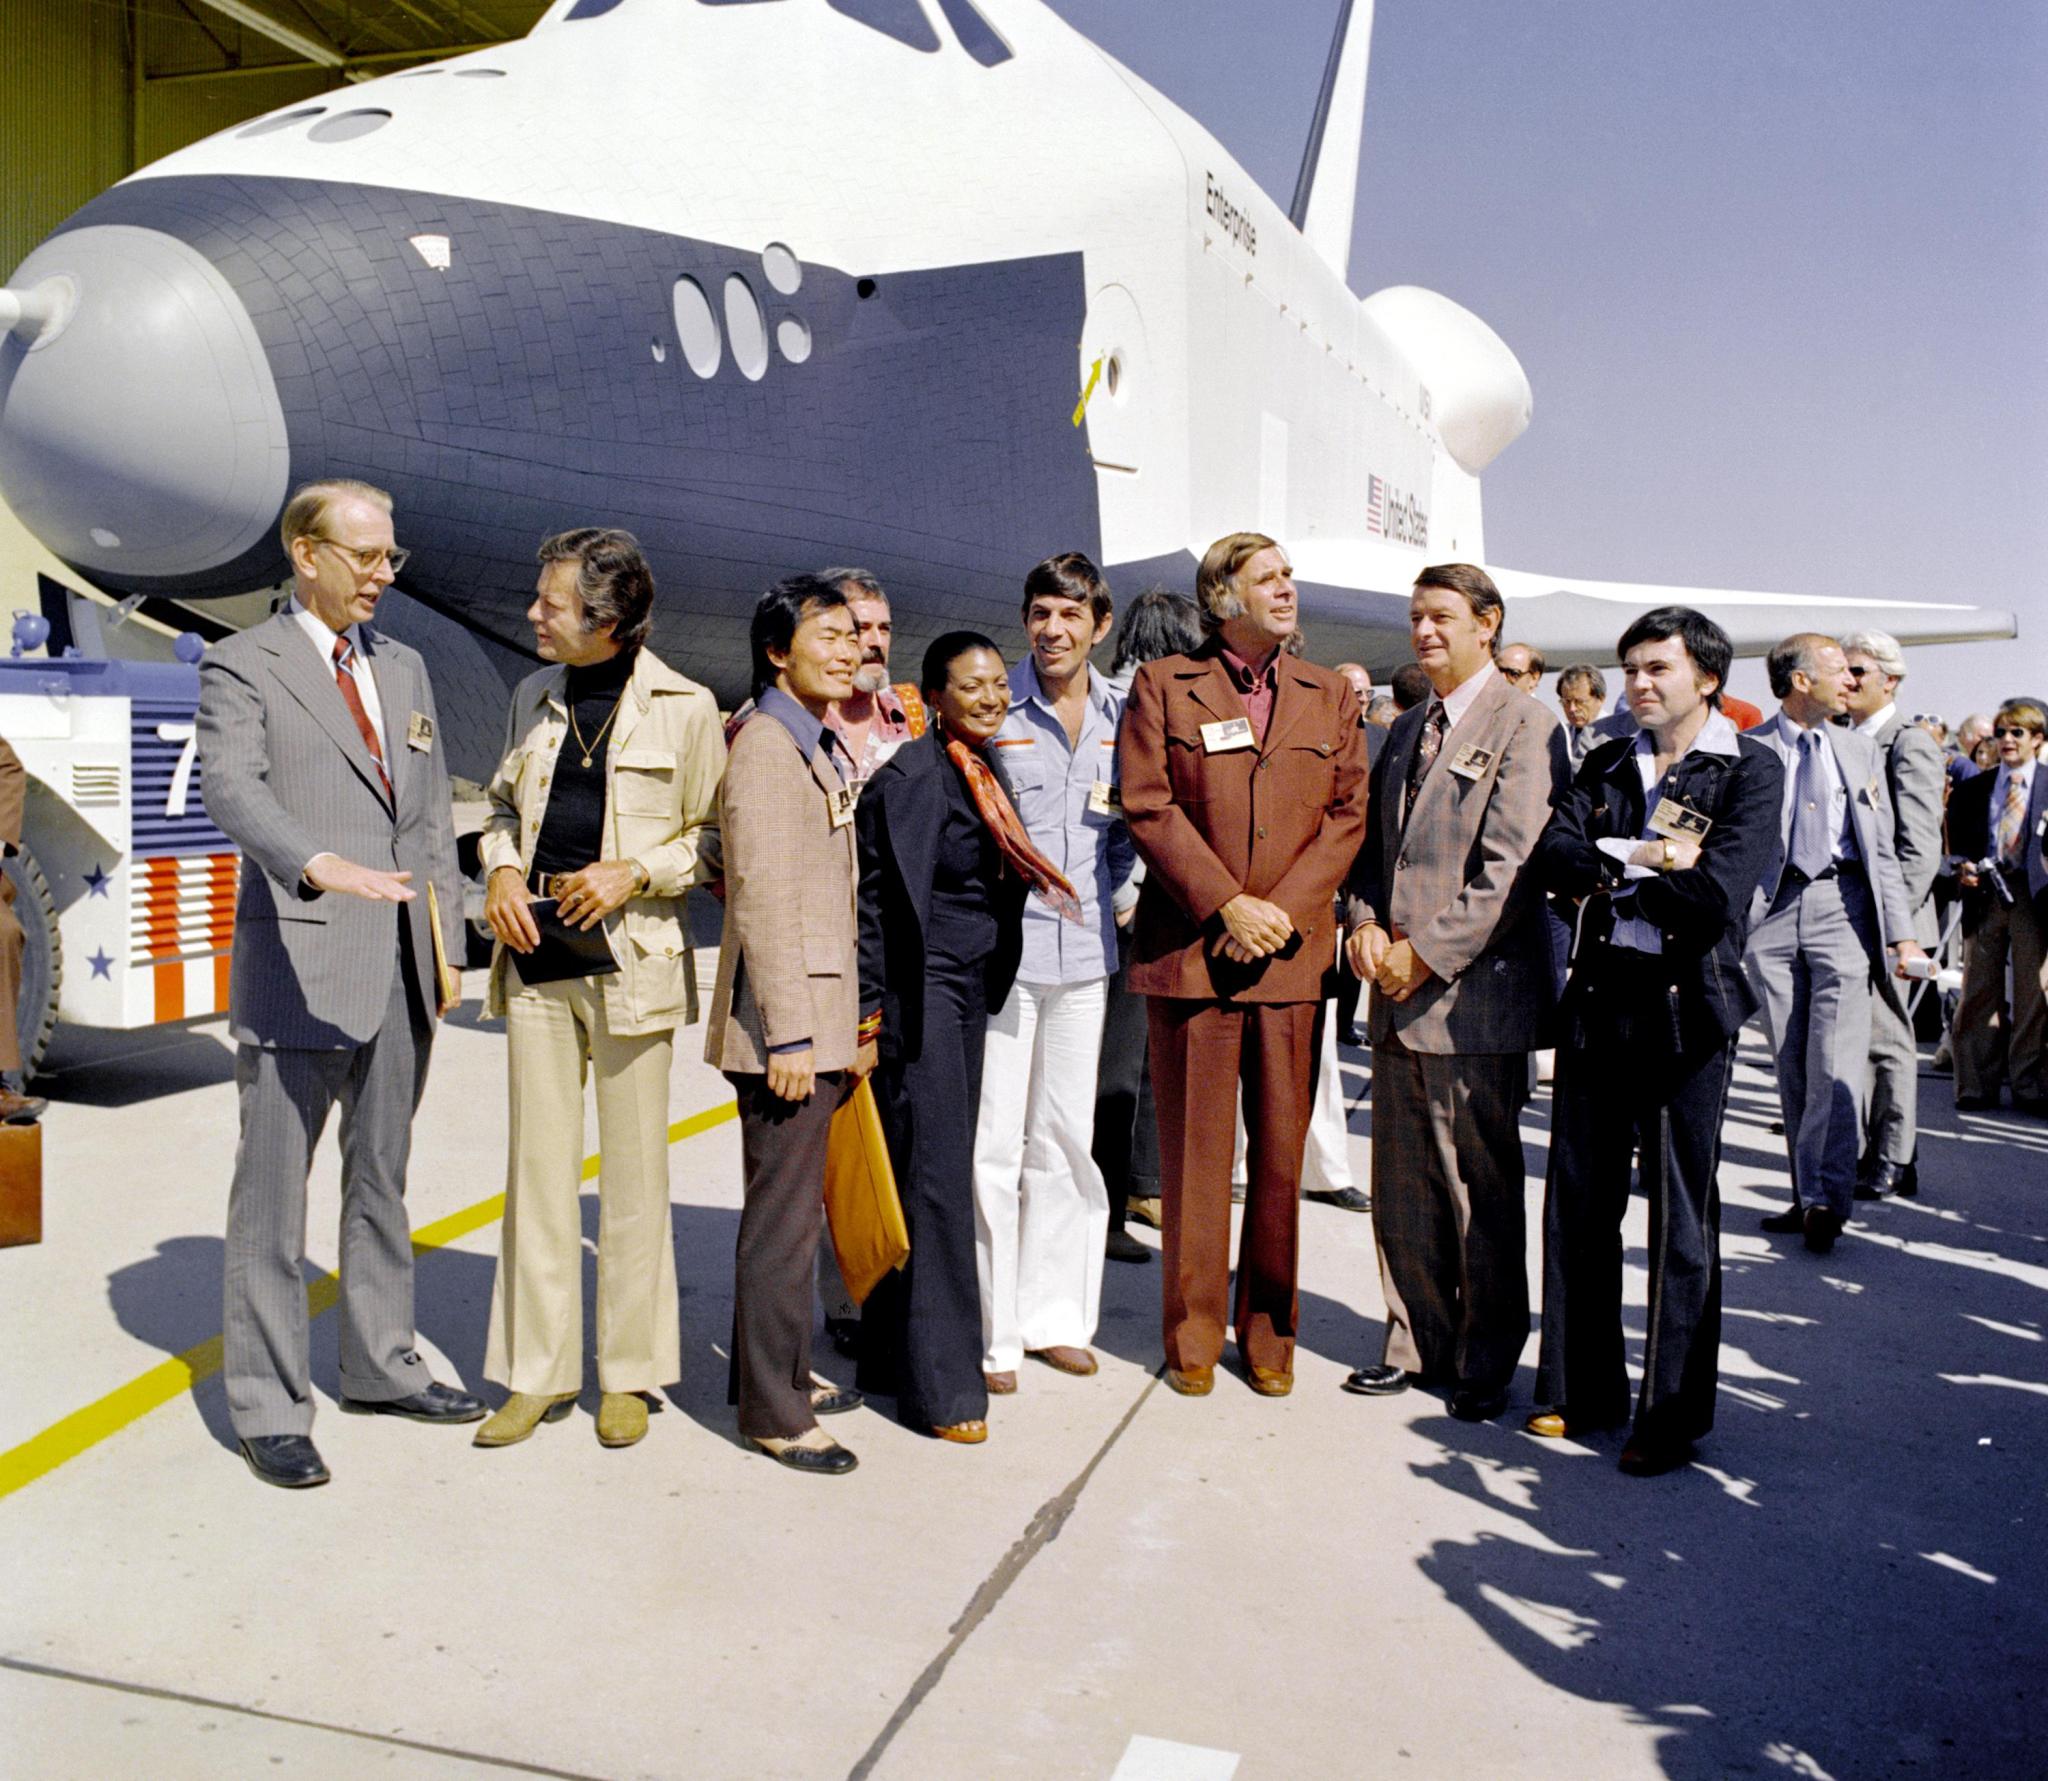 Cast of Star Trek: The Original Series with NASA officials at the rollout of the Space Shuttle Enterprise in 1976.